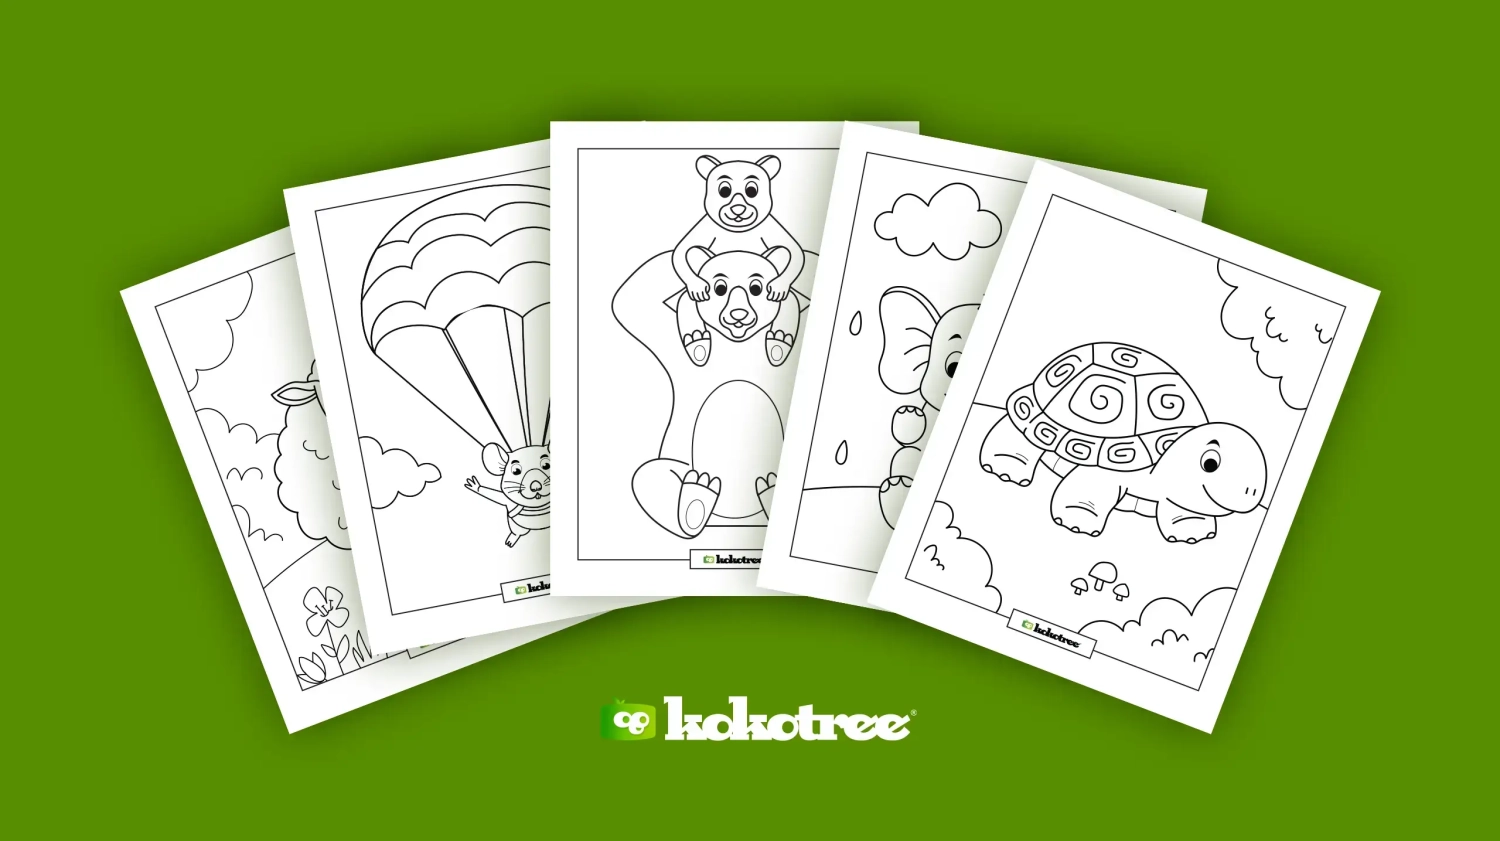 FREE! - ABC Colouring Book Page, Primary Resources